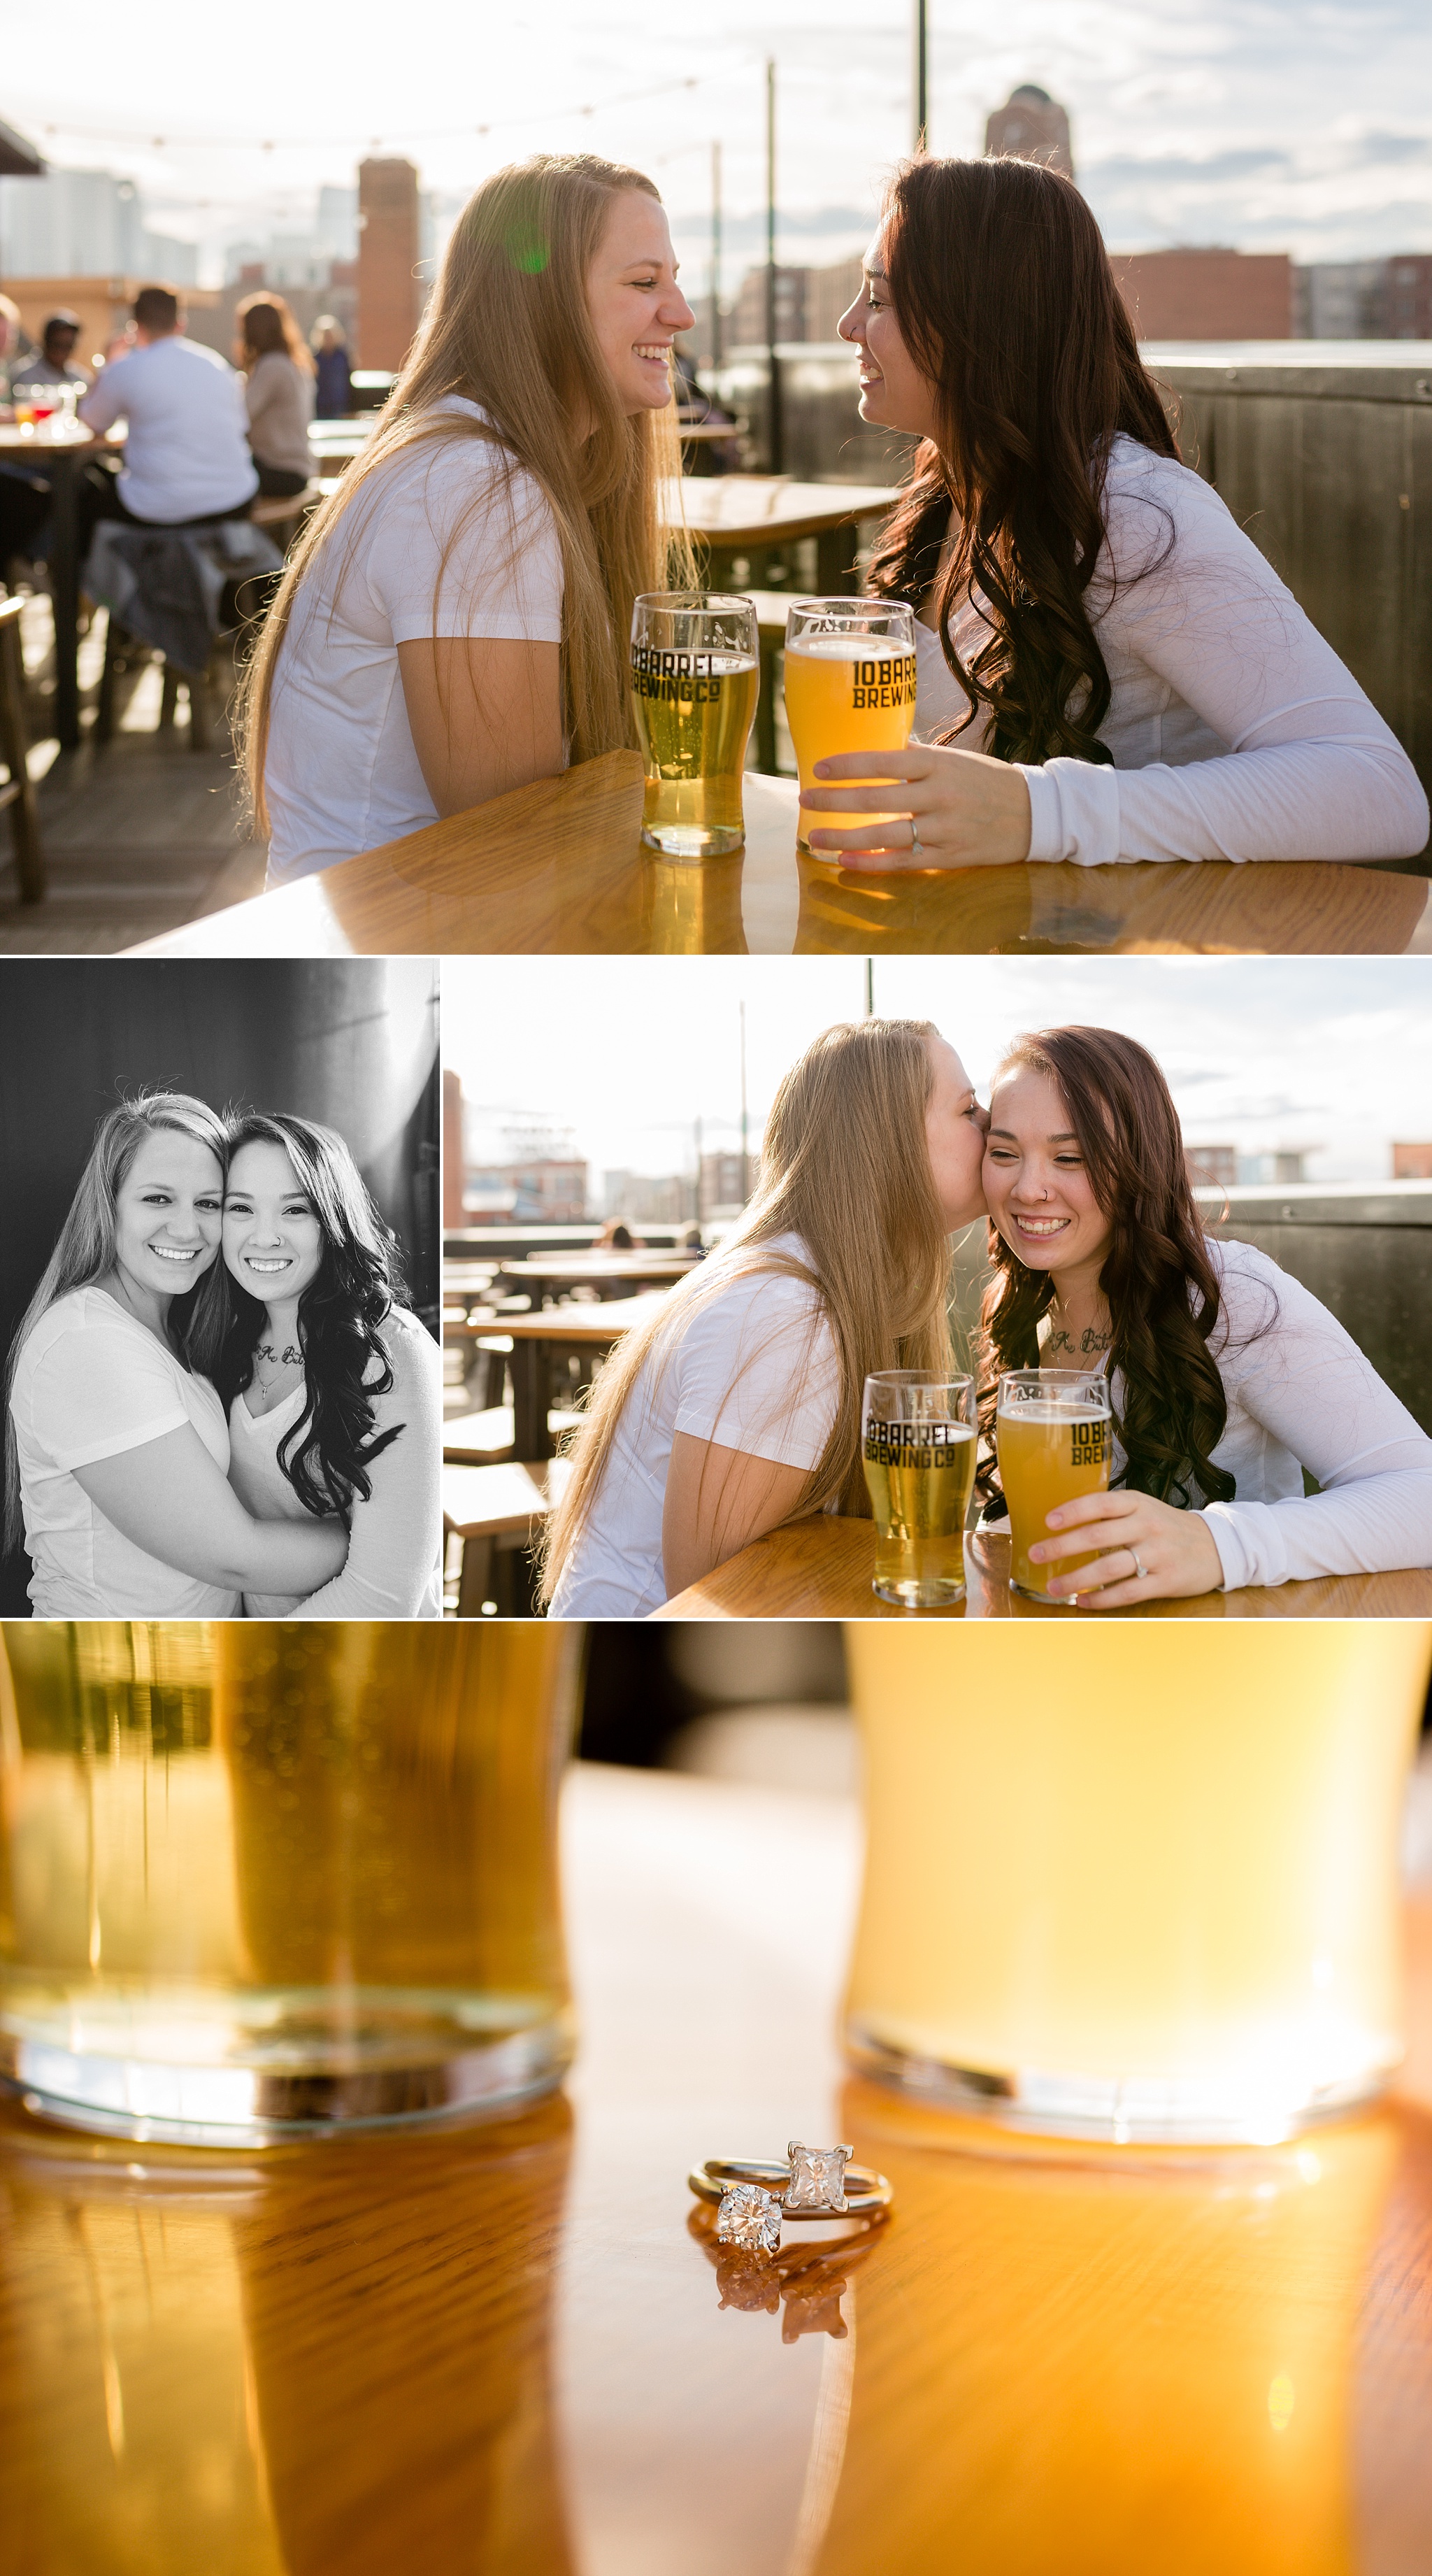 Couple enjoying a beer together. Jessica & Caity’s Same-Sex Engagement Session at 10 Barrel Brewery & RiNo District by Colorado Engagement Photographer, Jennifer Garza. 10 Barrel Brewery Engagement, Brewery Engagement Photos, RiNo District Engagement Photos, RiNo District, RiNo Engagement Photography, Denver Engagement Photography, Denver Engagement, Colorado Engagement Photography, Urban Engagement Photos, Same-Sex Engagement Photography, Same-Sex Engagement Photos, Same-Sex Marriage, Love is Love, LGBTQ